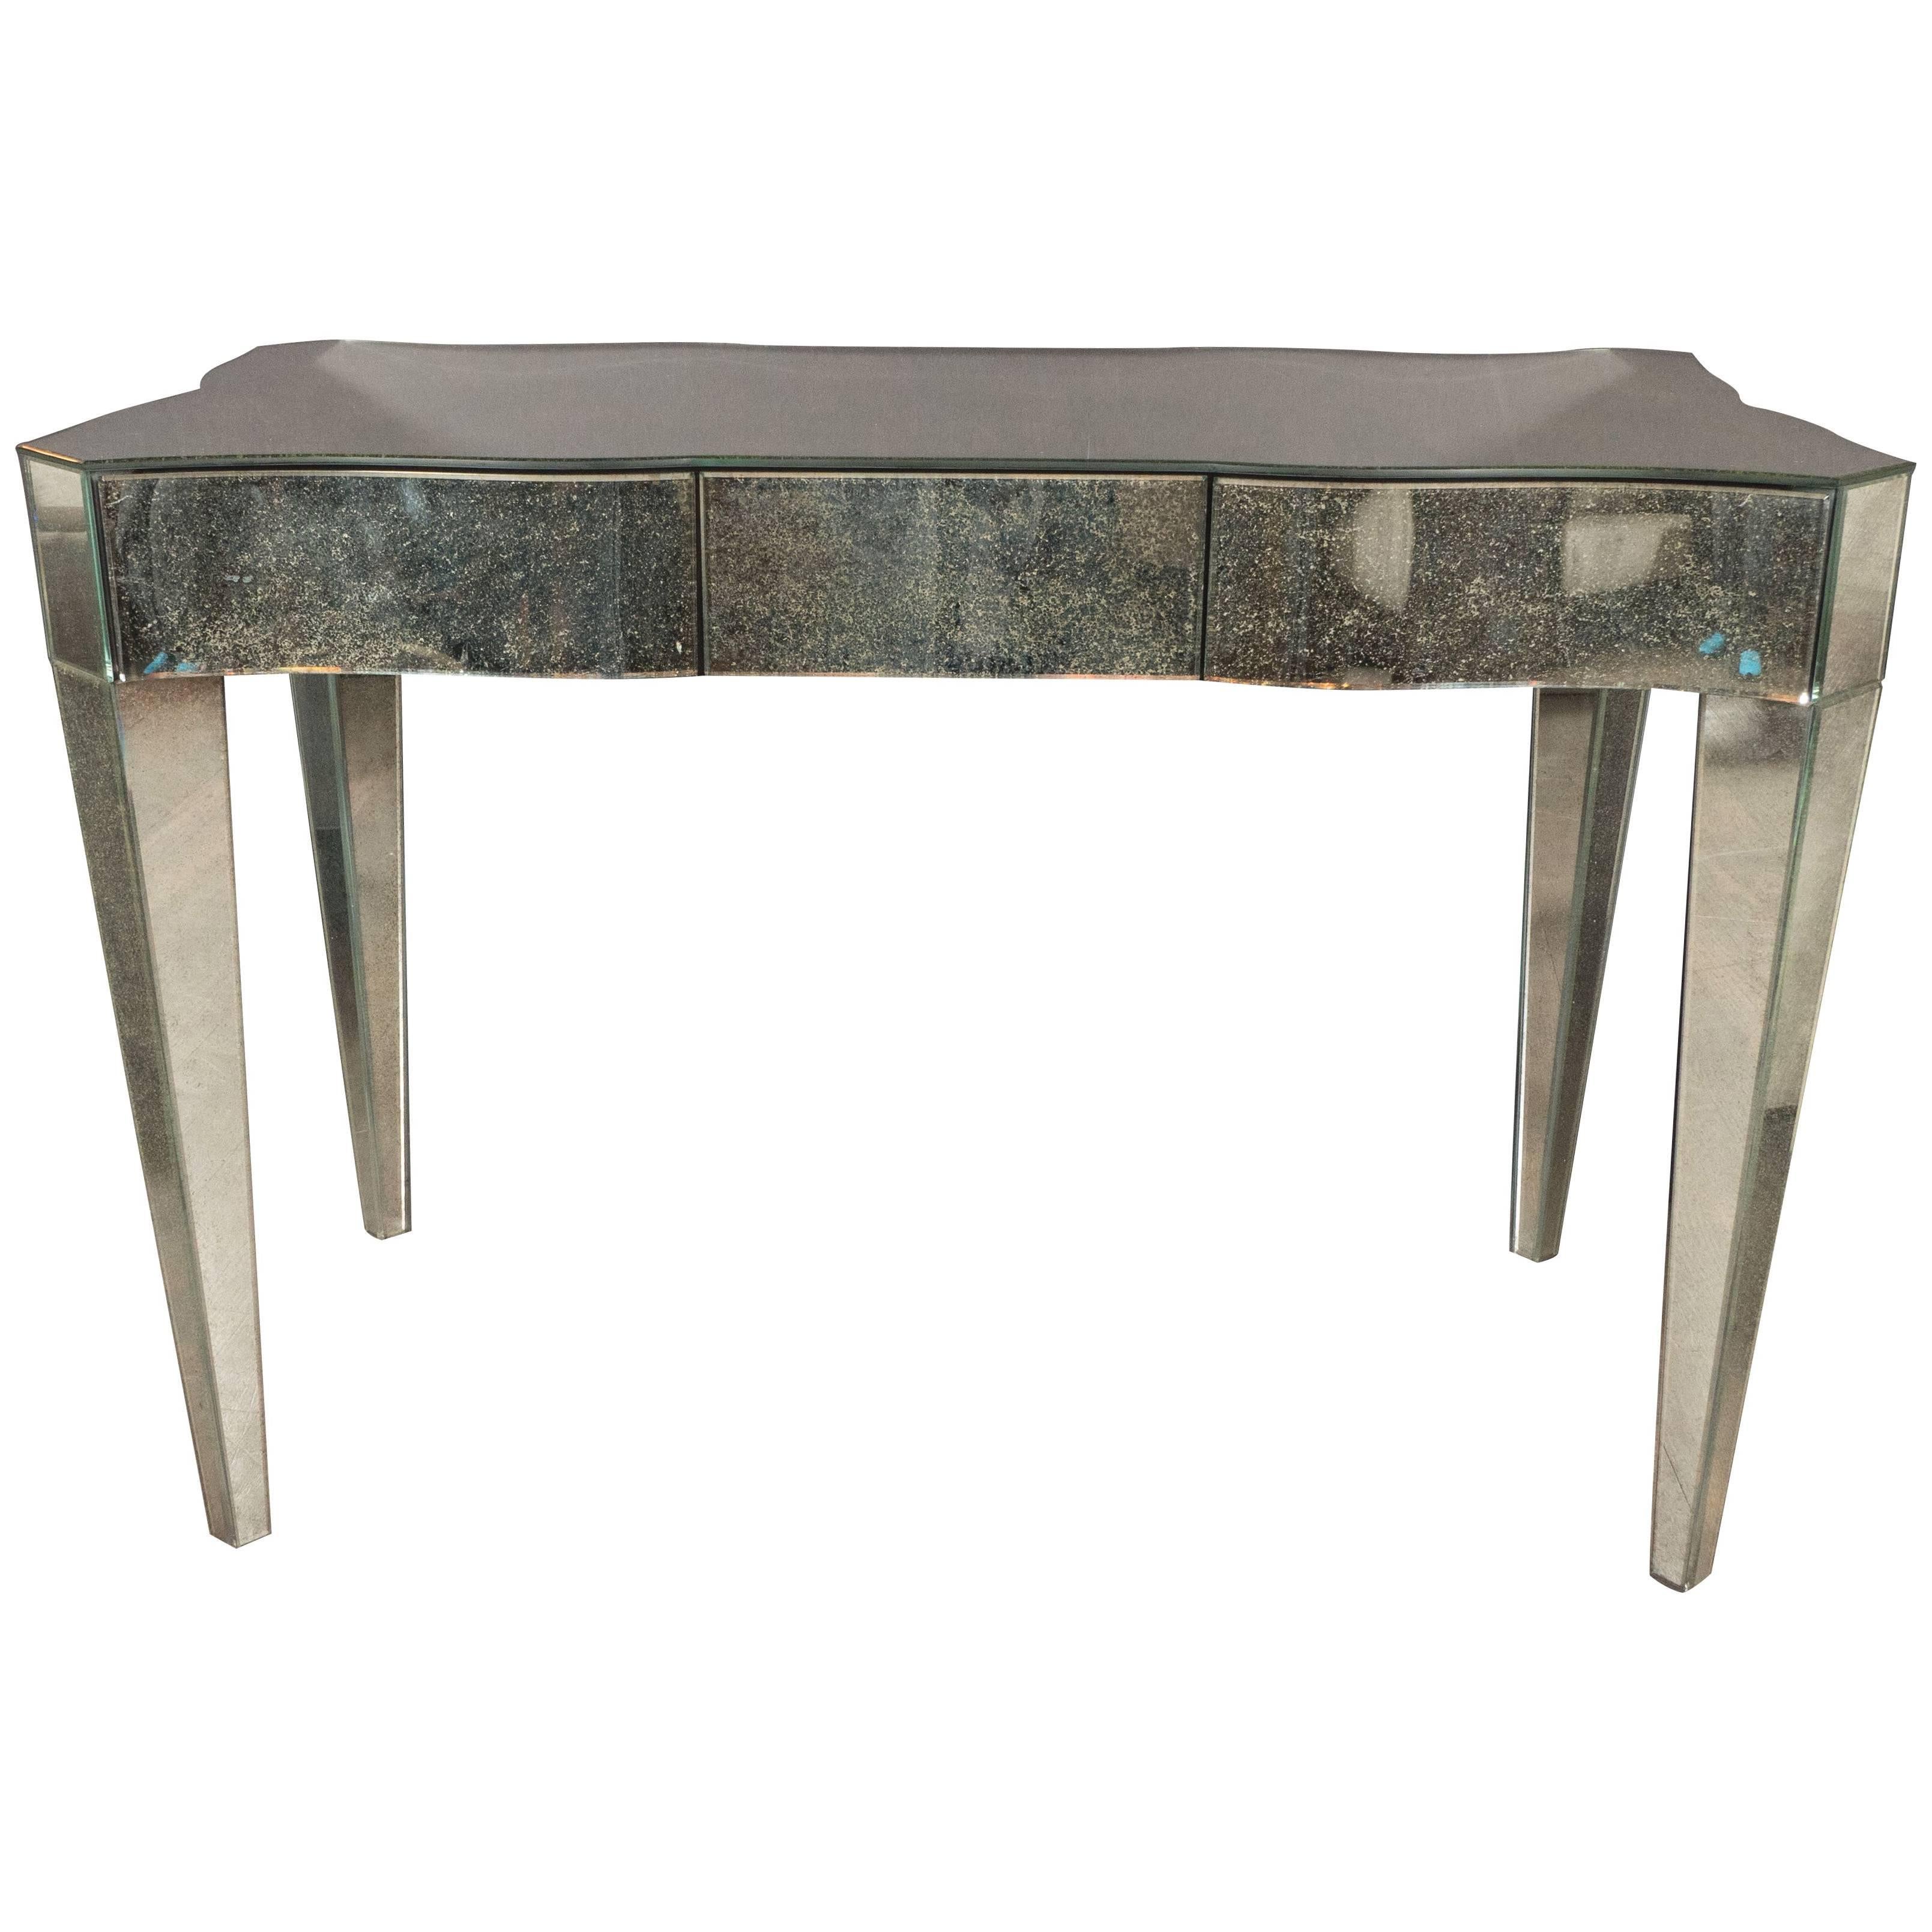 Hollywood Regency Style Mirrored Vanity or Writing Table with Antique Patina